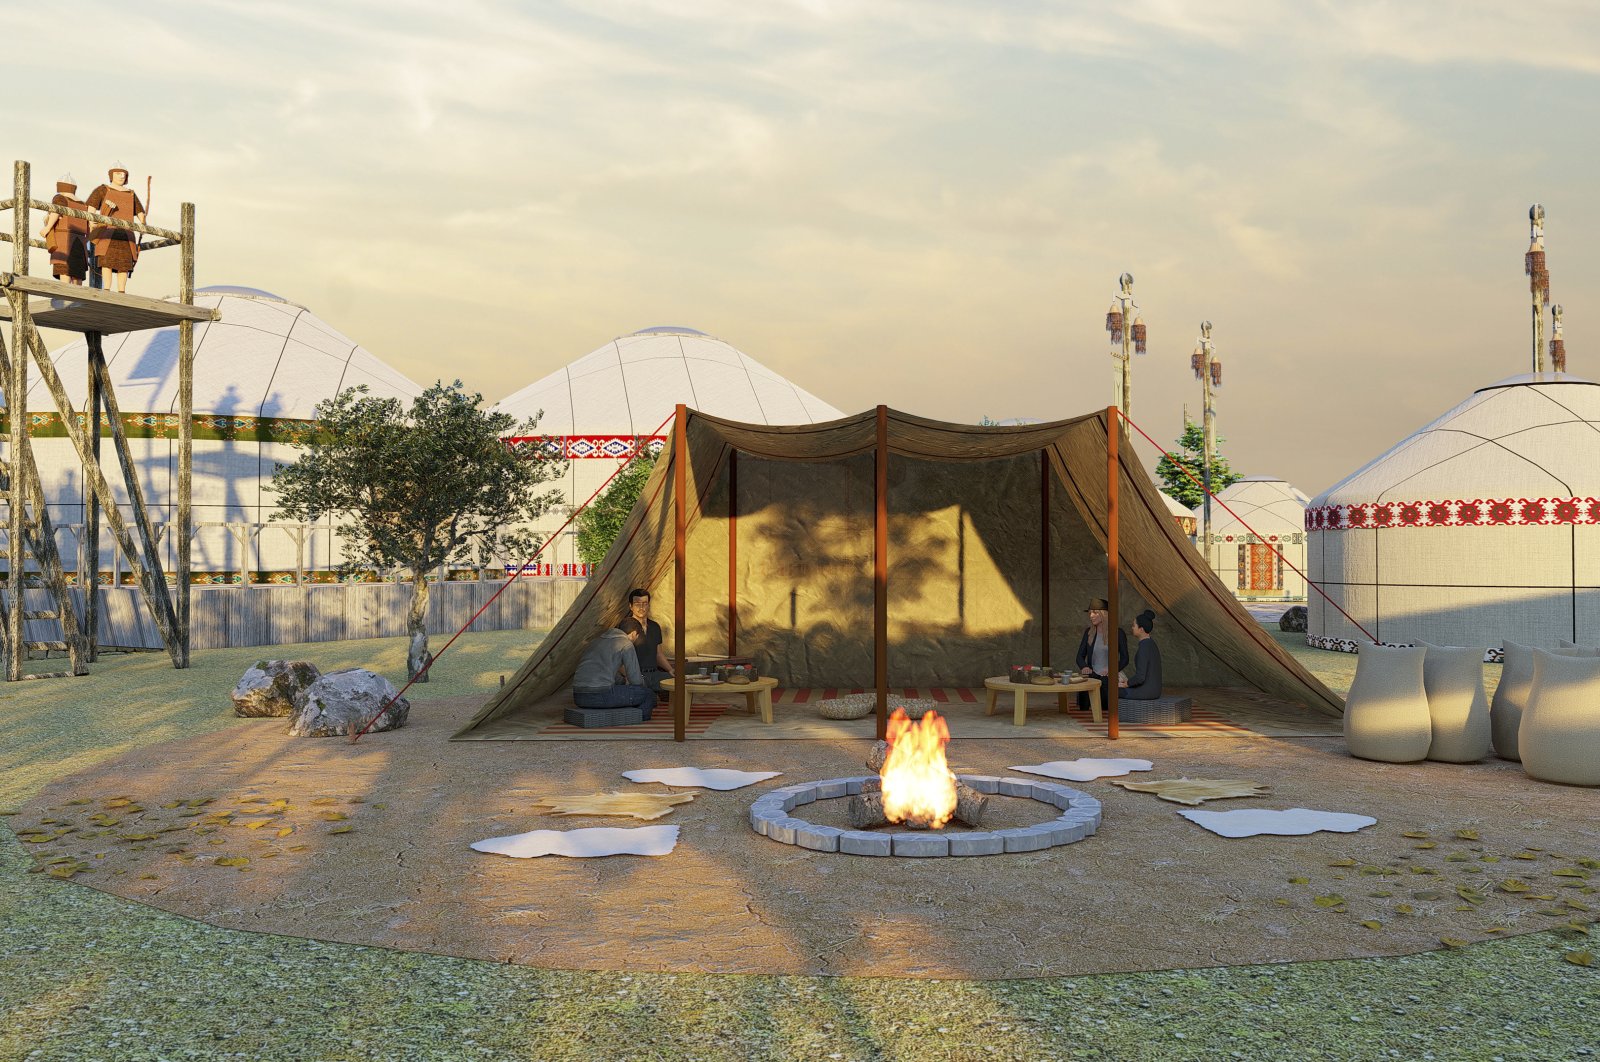 The accommodation area will consist of 40 haircloth tents. ( AA PHOTO)